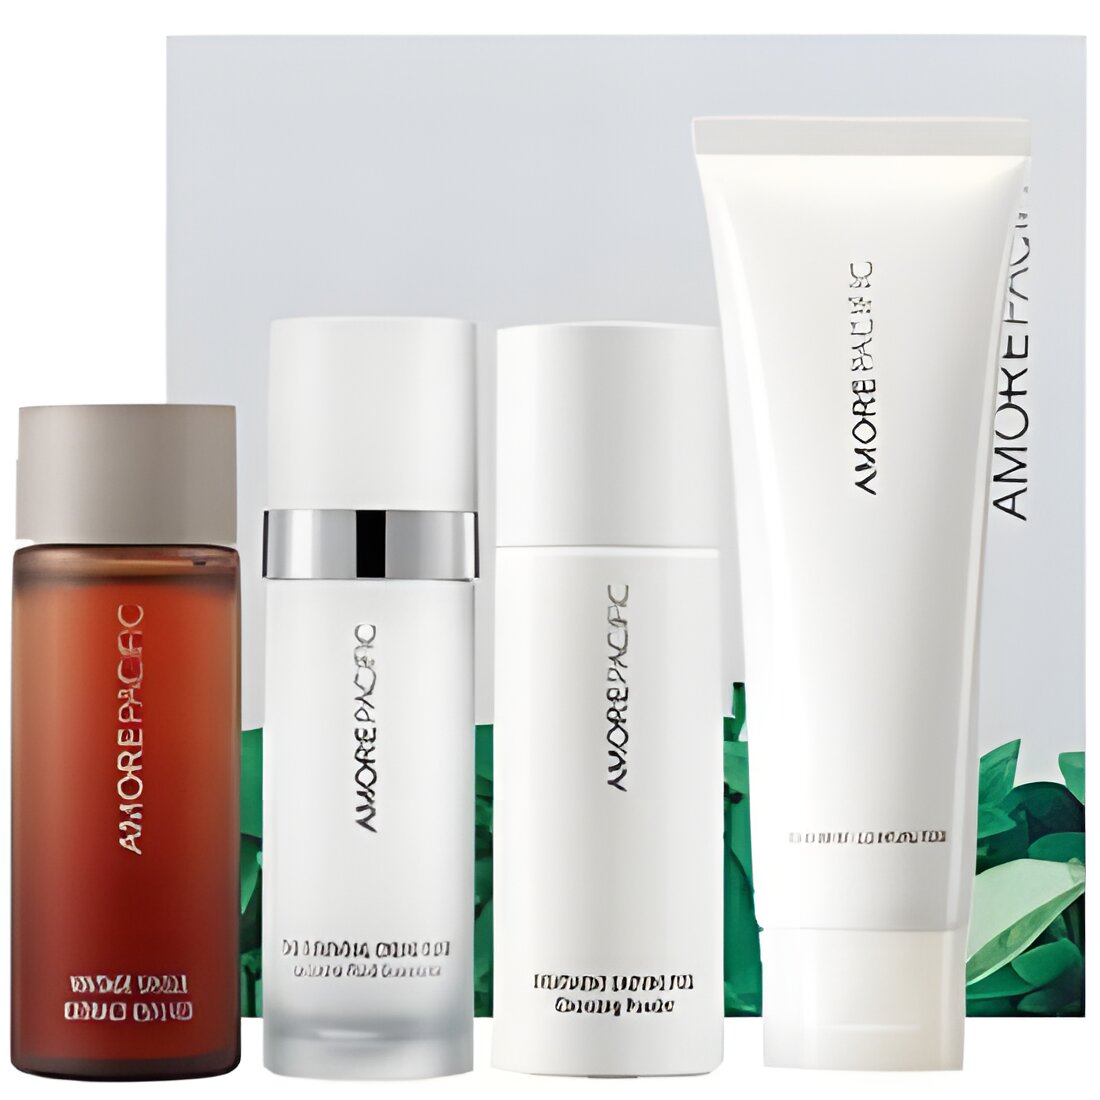 Free Amorepacific Beauty Deluxe Sample